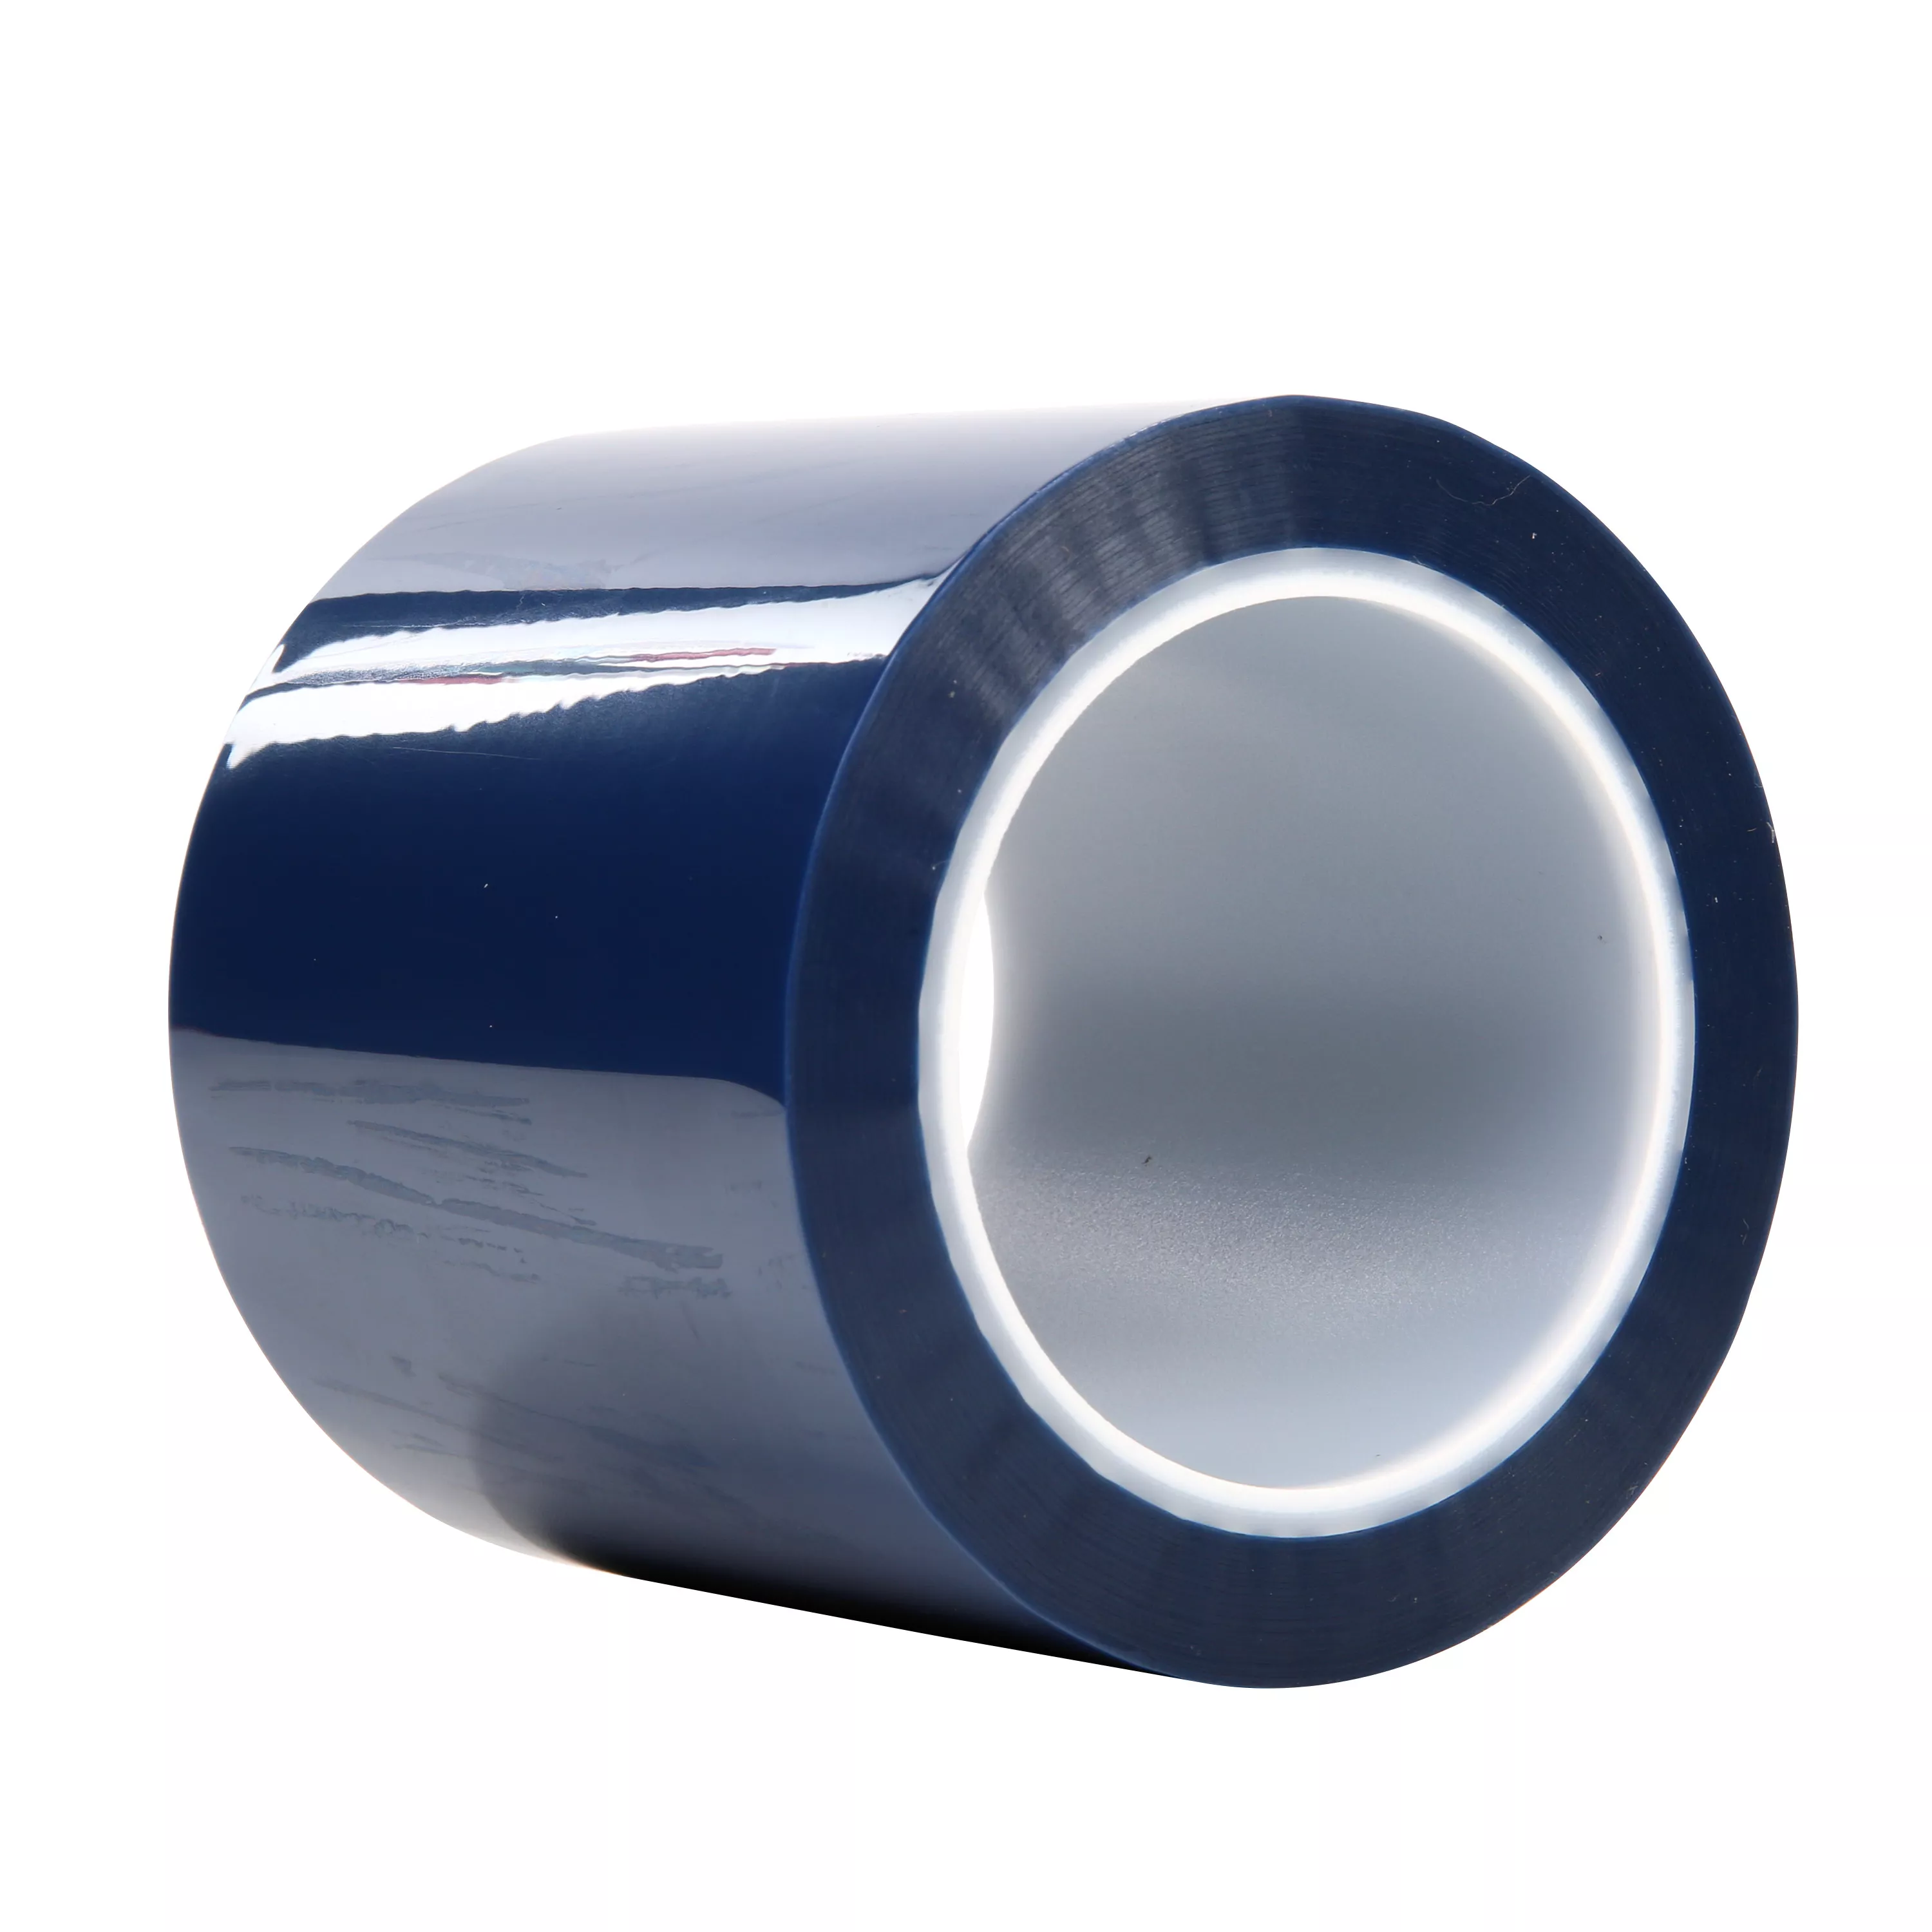 3M™ Polyester Tape 8991, Blue, 4 in x 72 yd, 2.4 mil, 8 Roll/Case